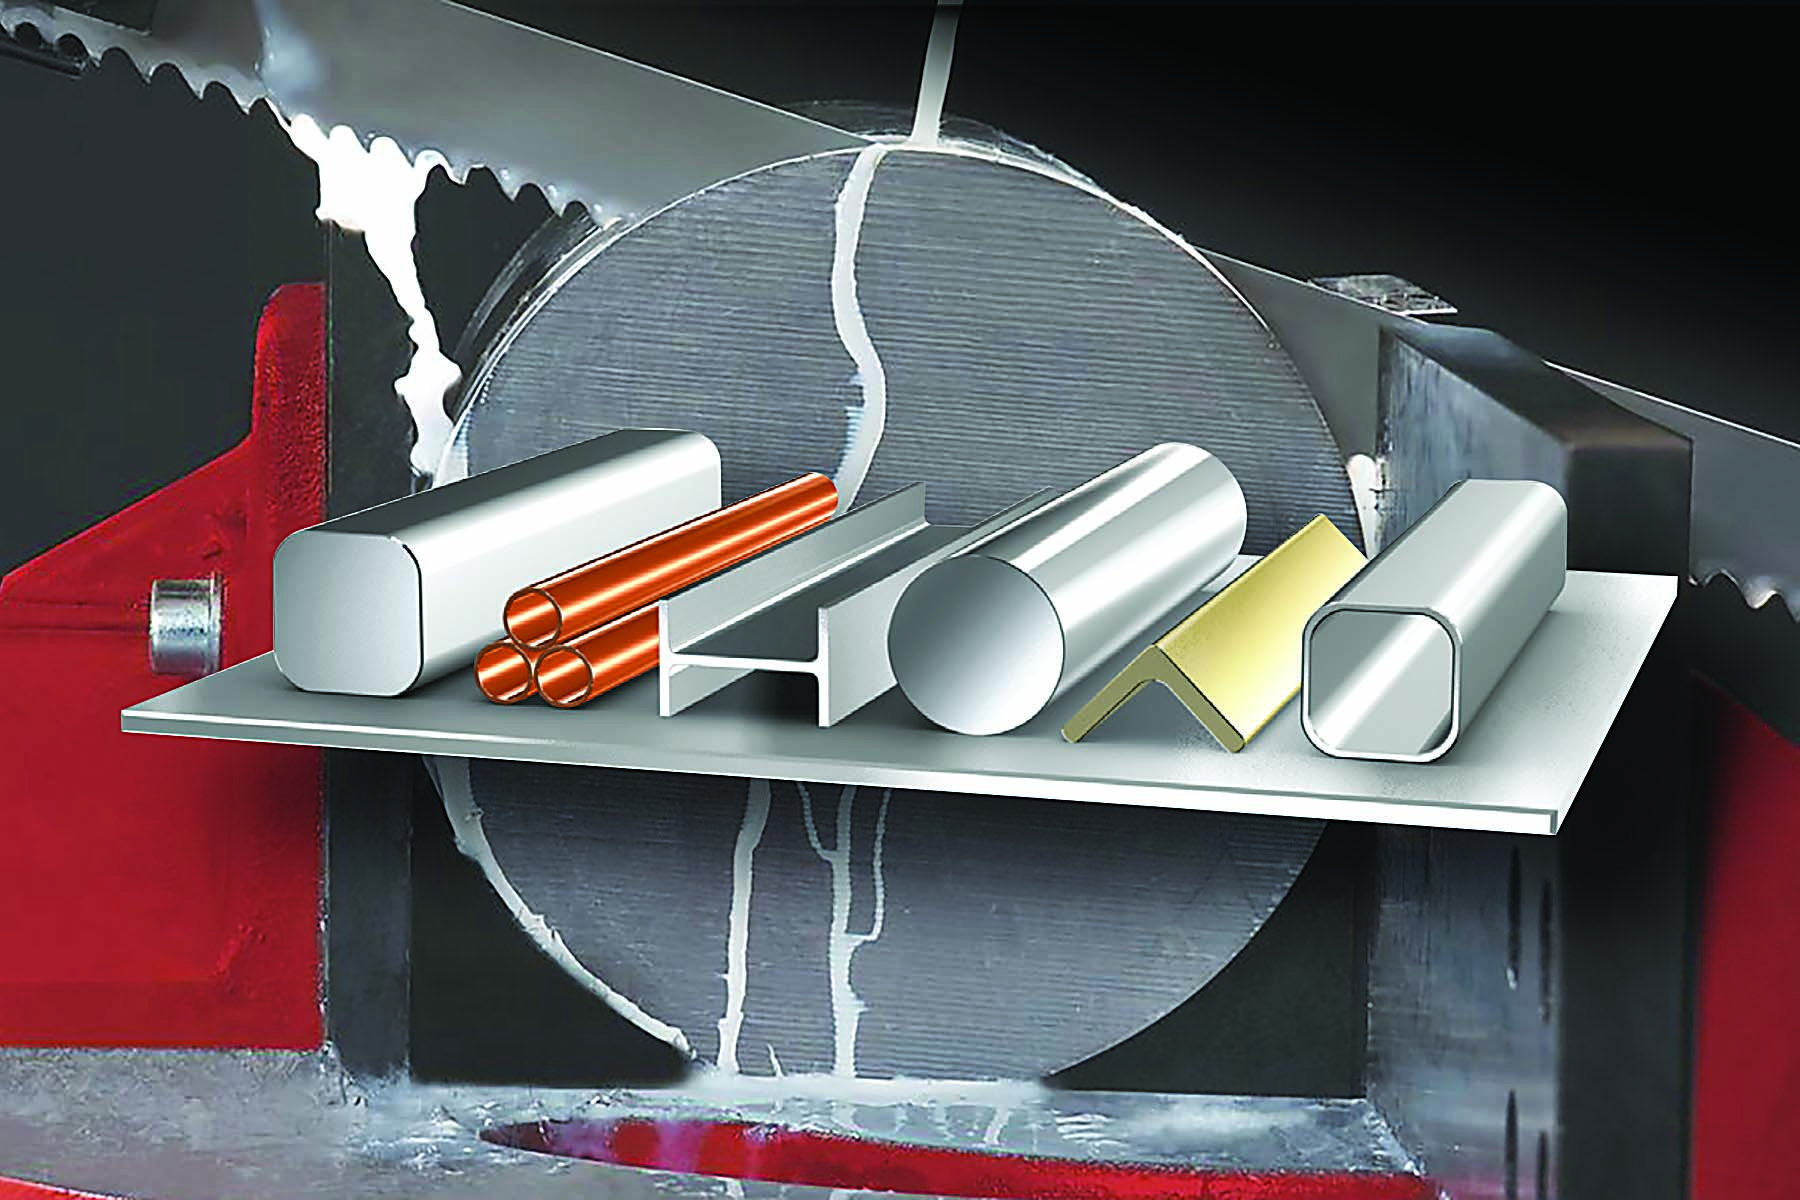 Intenss bimetal band saw blades offer general-purpose metal sawing of a wide range of materials and shapes. Featuring a patented process called bimetal unique technology, which provides 170% more weld contact with teeth, Intenss blades exhibit superior resistance to tooth strippage, significantly reducing fracture and breakage and enabling exceptionally long blade life.